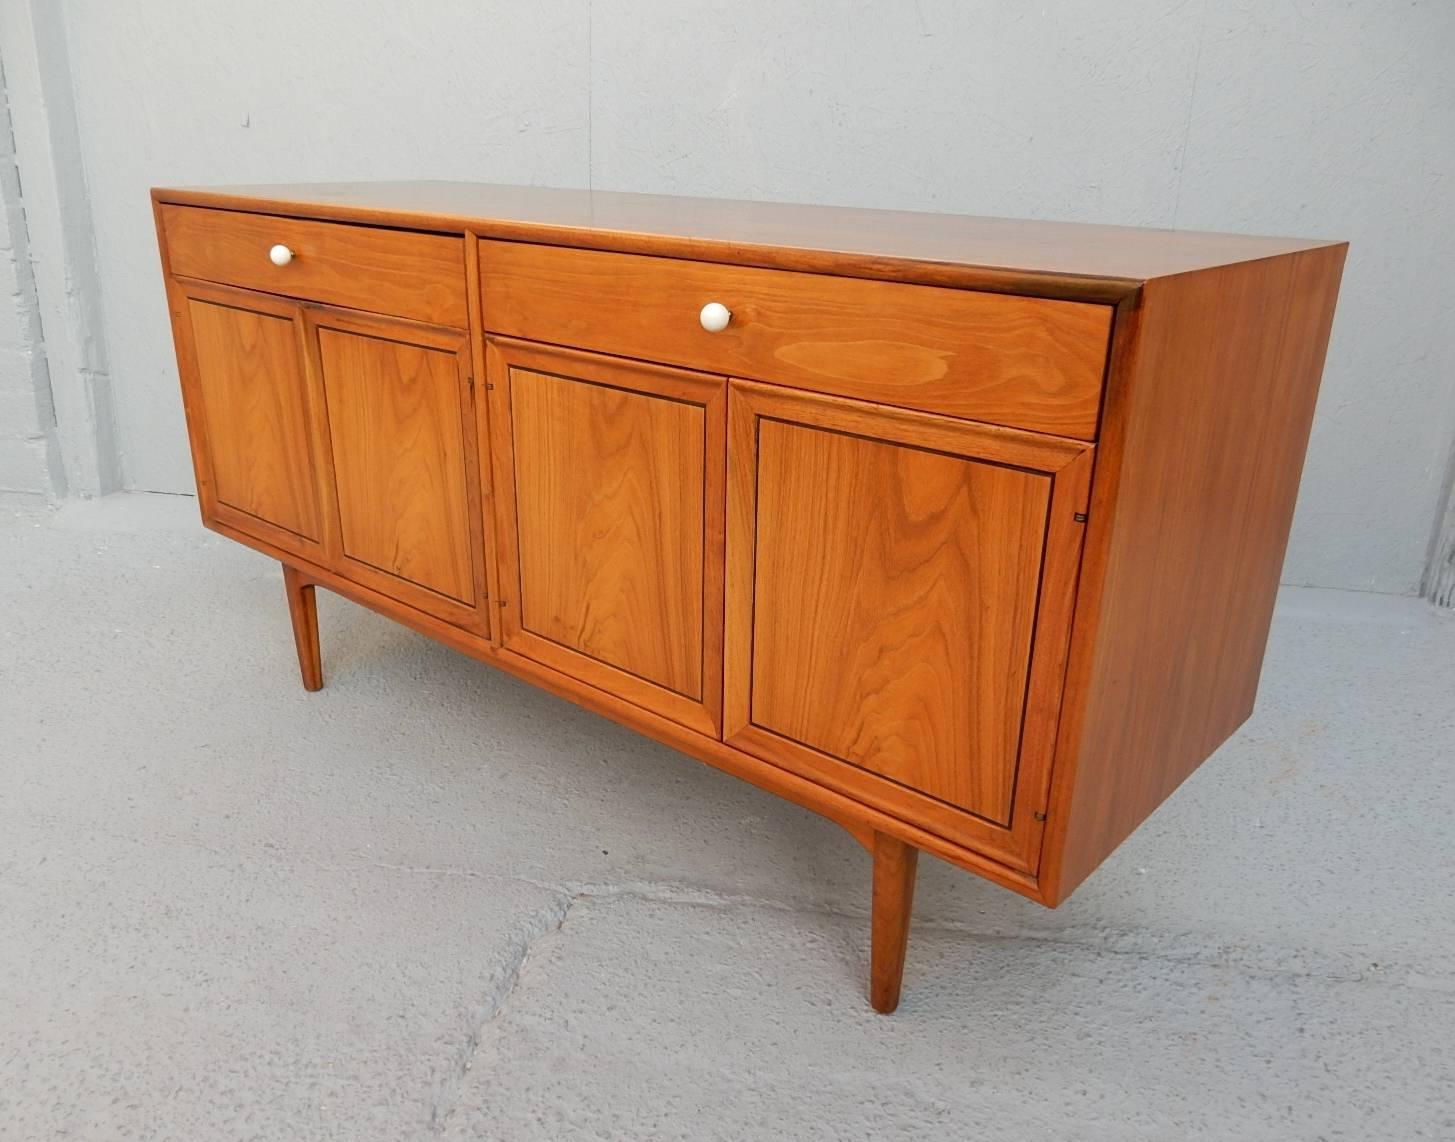 Gorgeous Drexel "Declaration" buffet designed by Kipp Stewart.
Immaculate condition. Two top drawers and two double cabinets with small lighted interior.